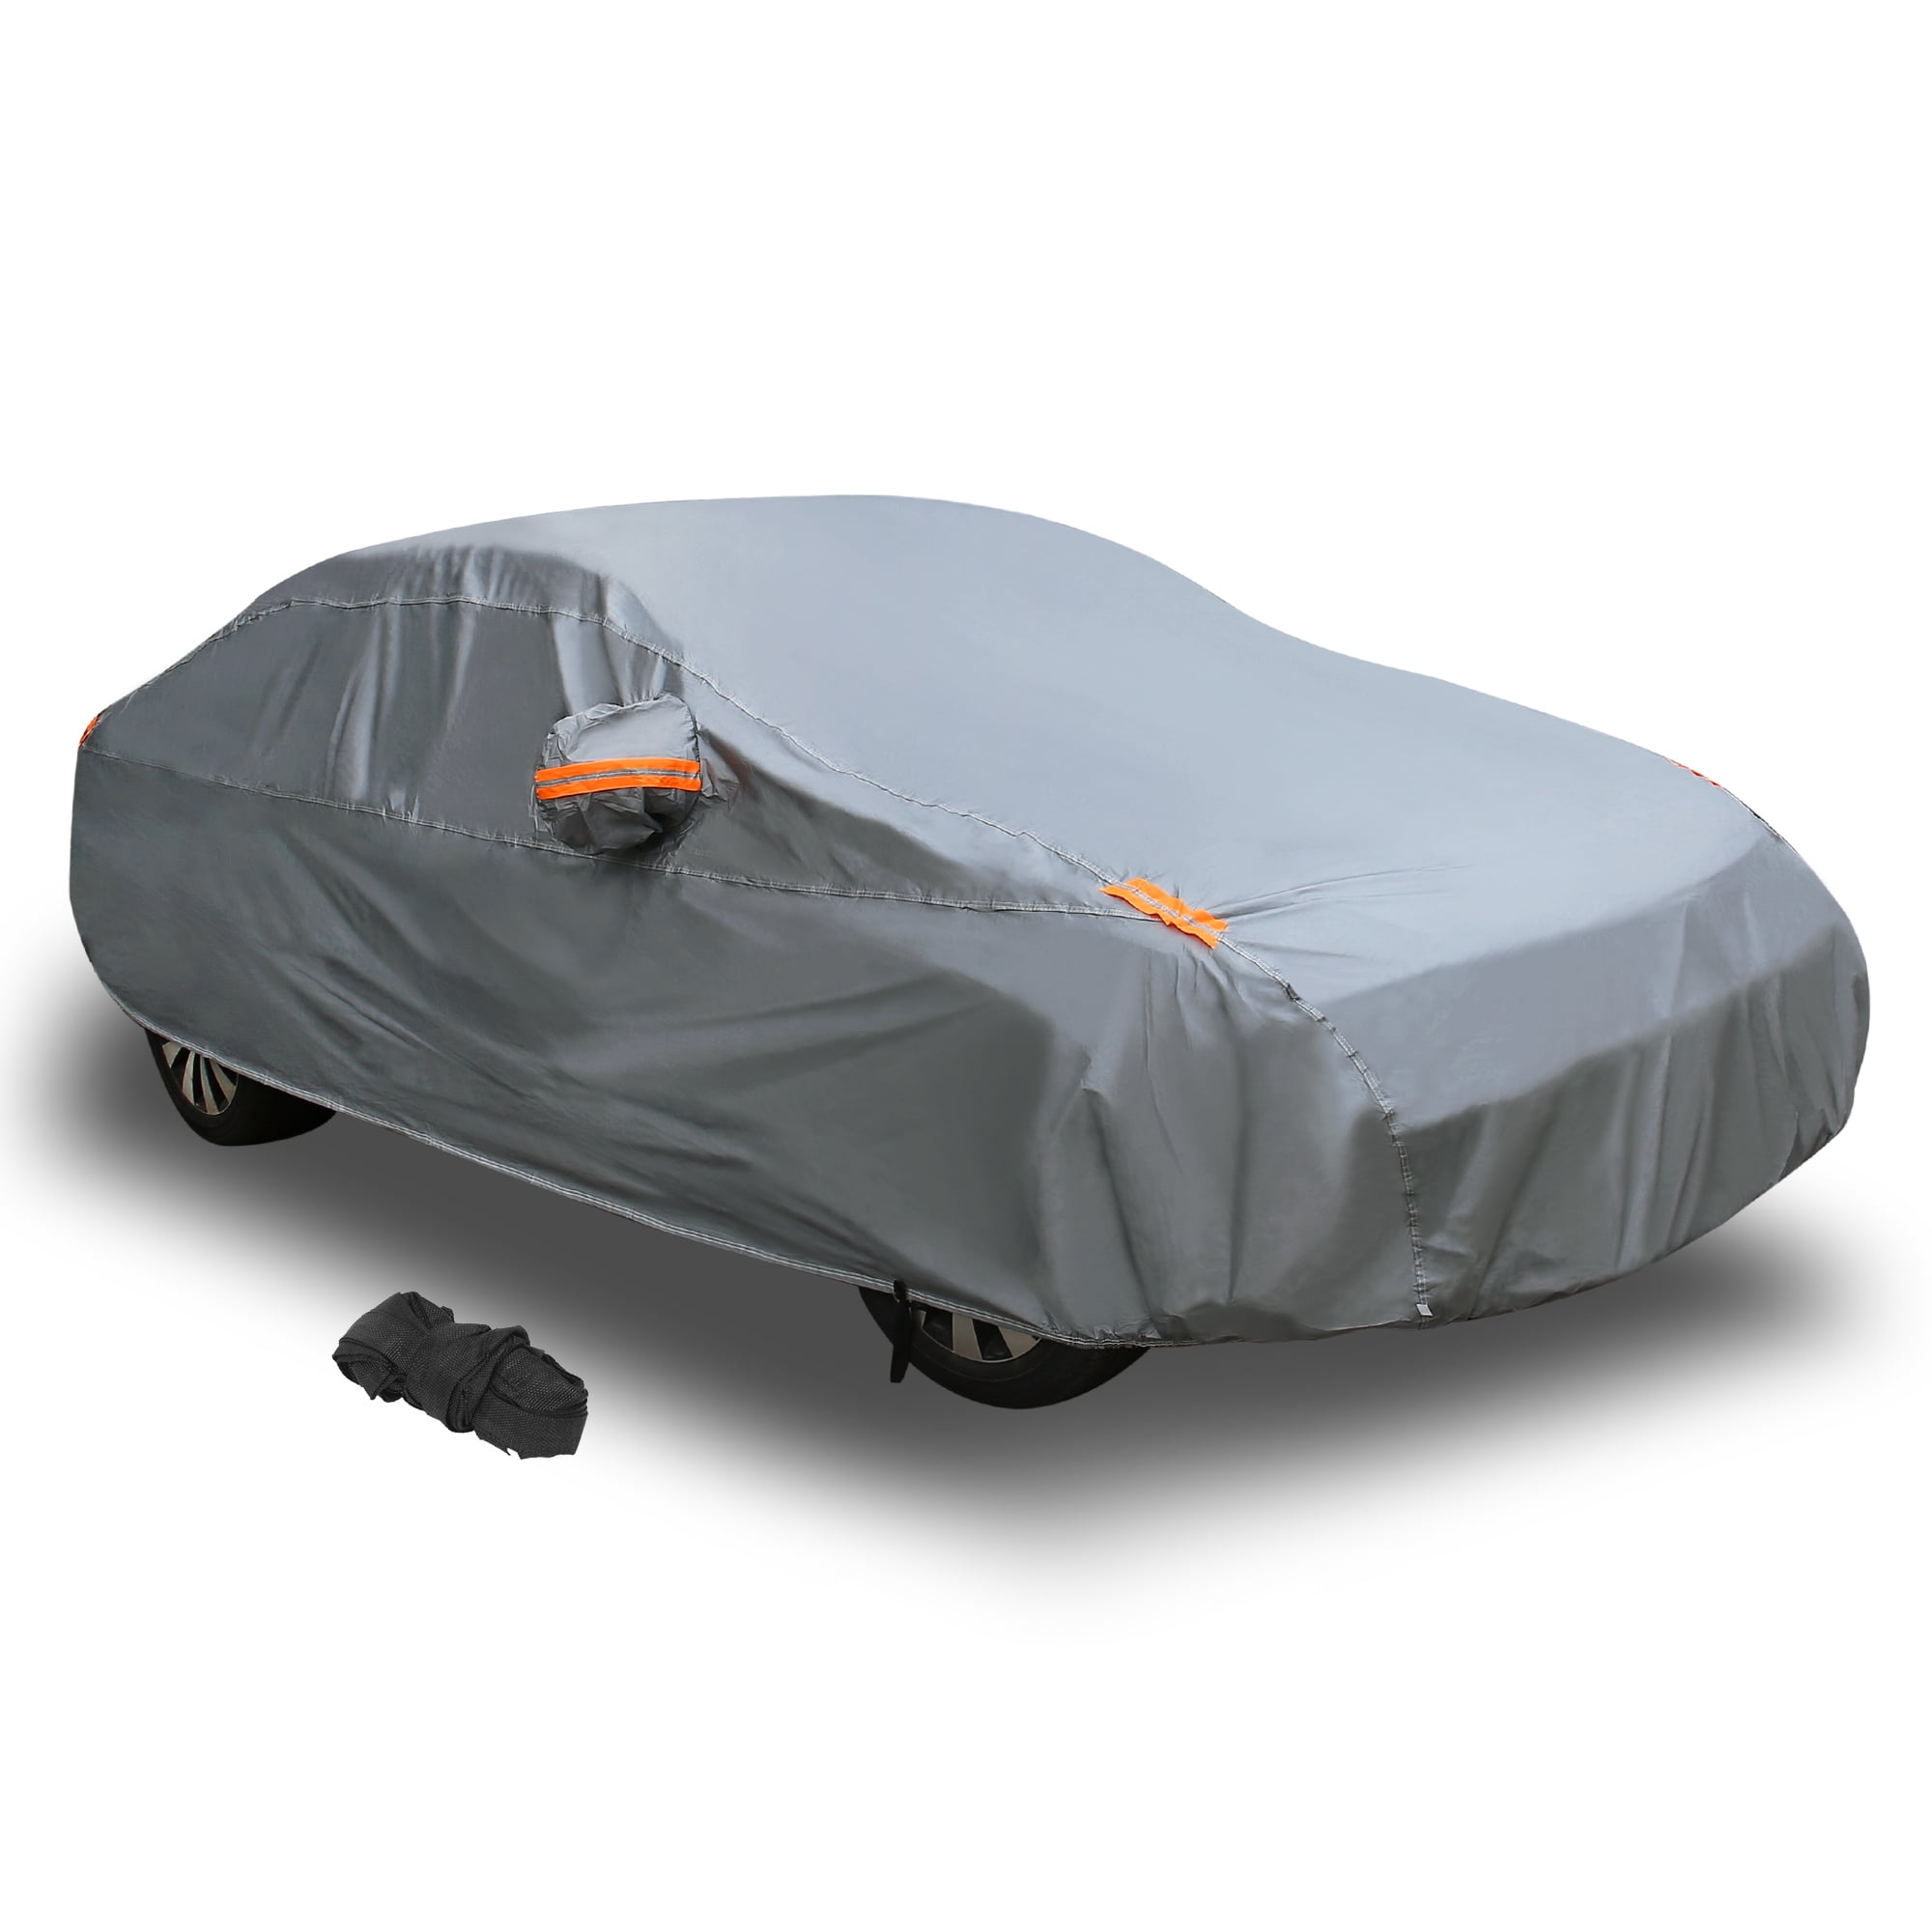 Unique Bargains PEVA Full Car Cover Waterproof Breathable Sun Resistant  Soft Lining for Sedans L Up to 187 Gray 